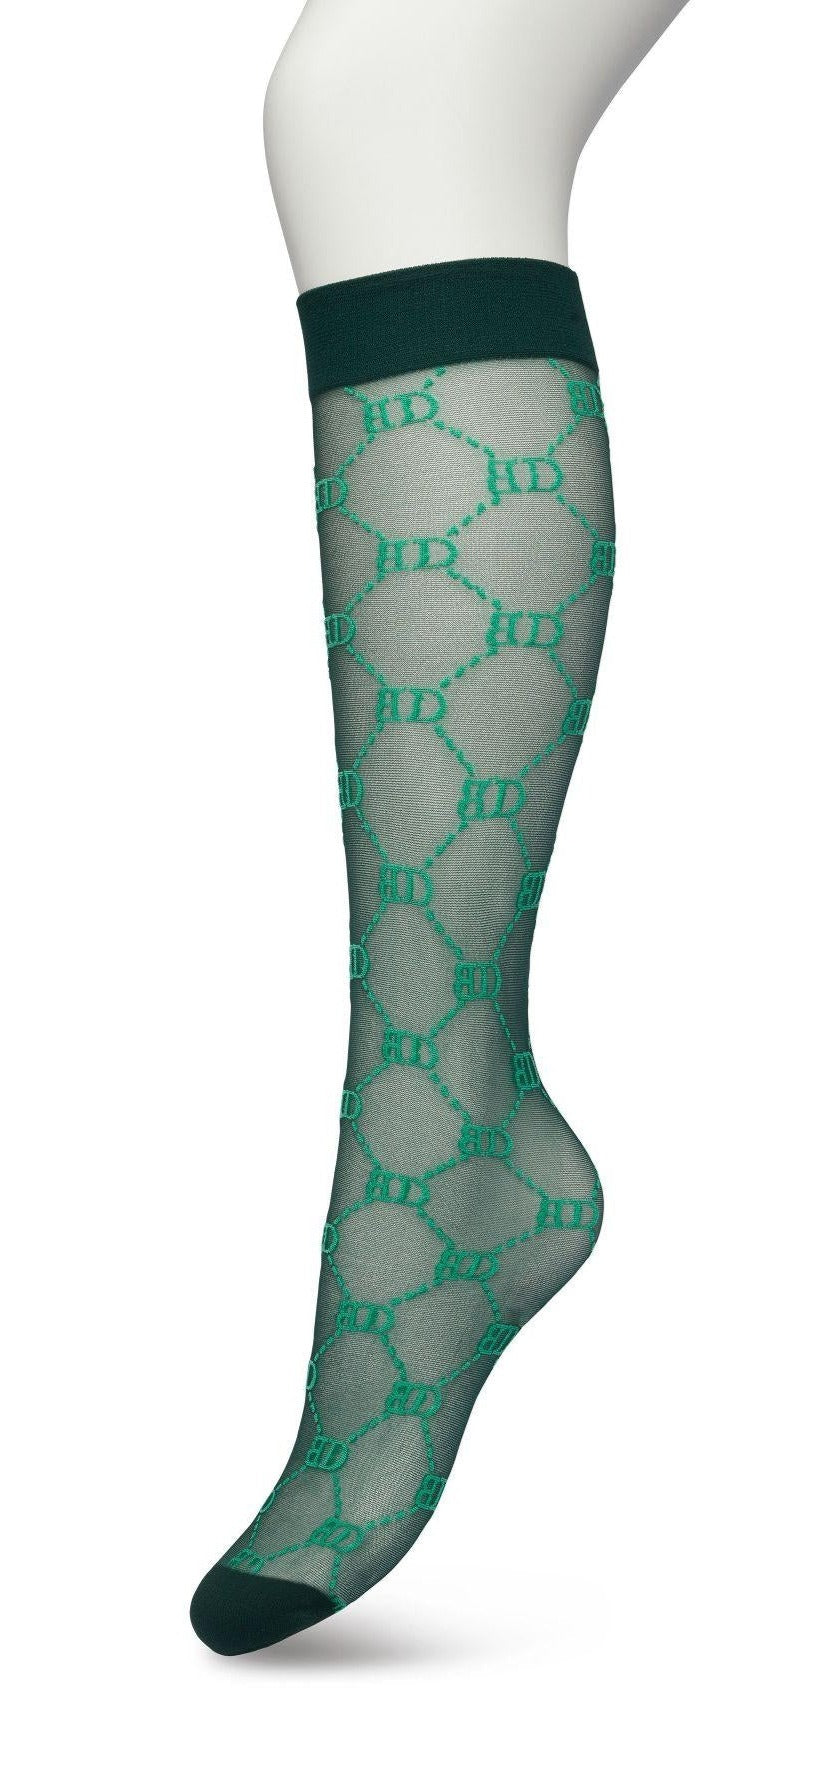 Bonnie Doon BP221801 Logo Knee-highs - Sheer dark bottle greenGucci inspired fashion knee high socks with a woven dotted diamond style pattern with BD for Bonnie Doon